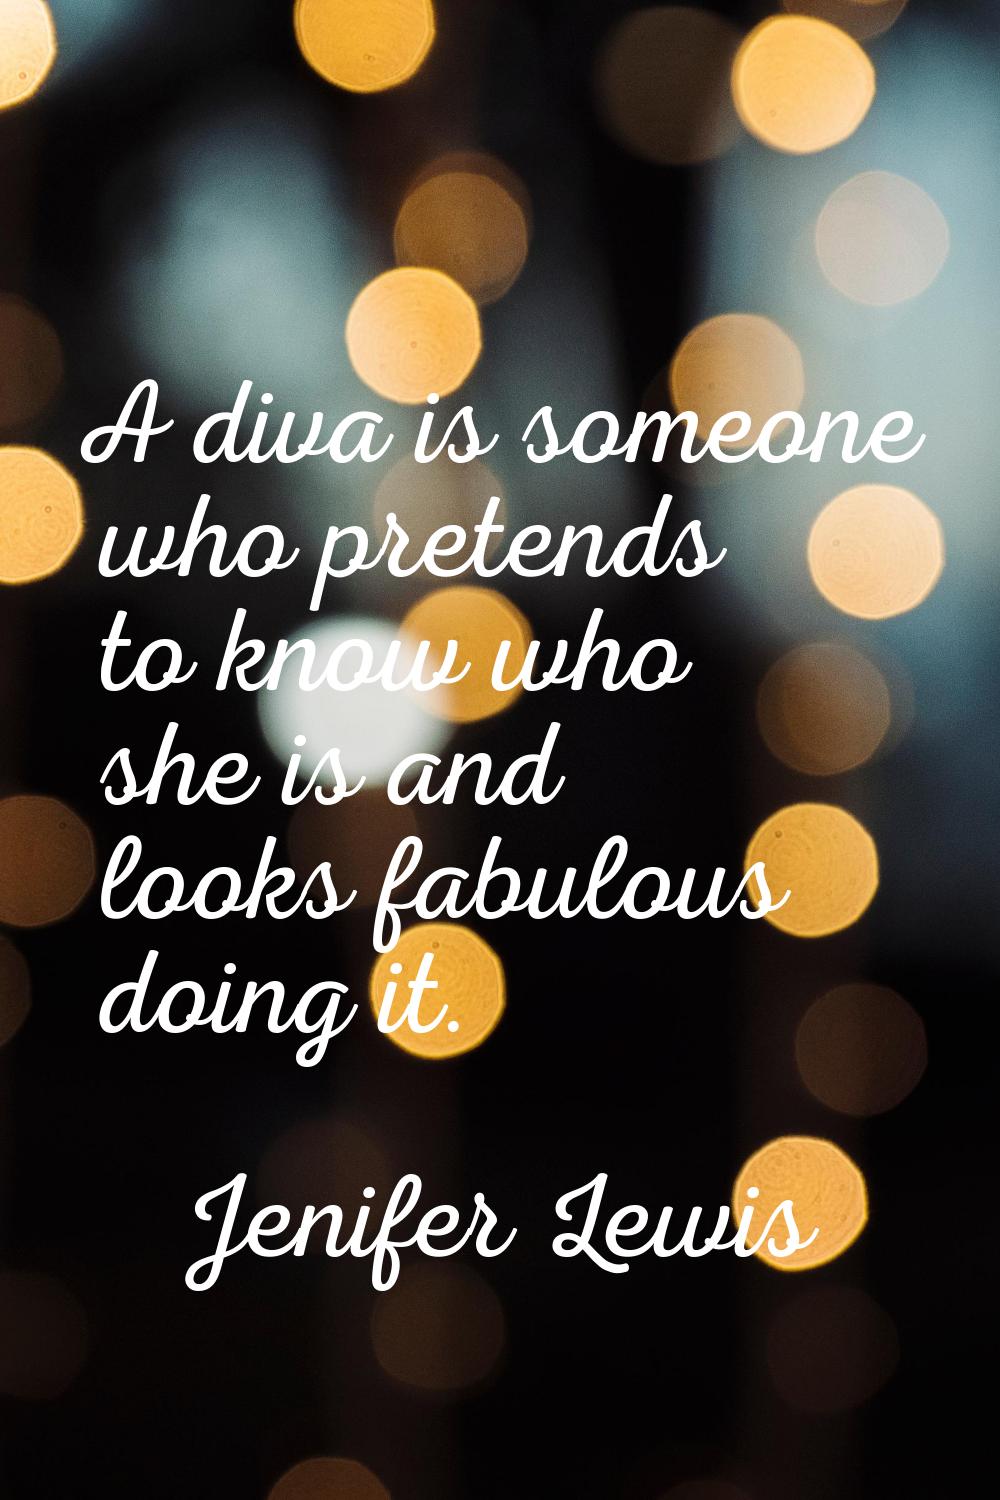 A diva is someone who pretends to know who she is and looks fabulous doing it.